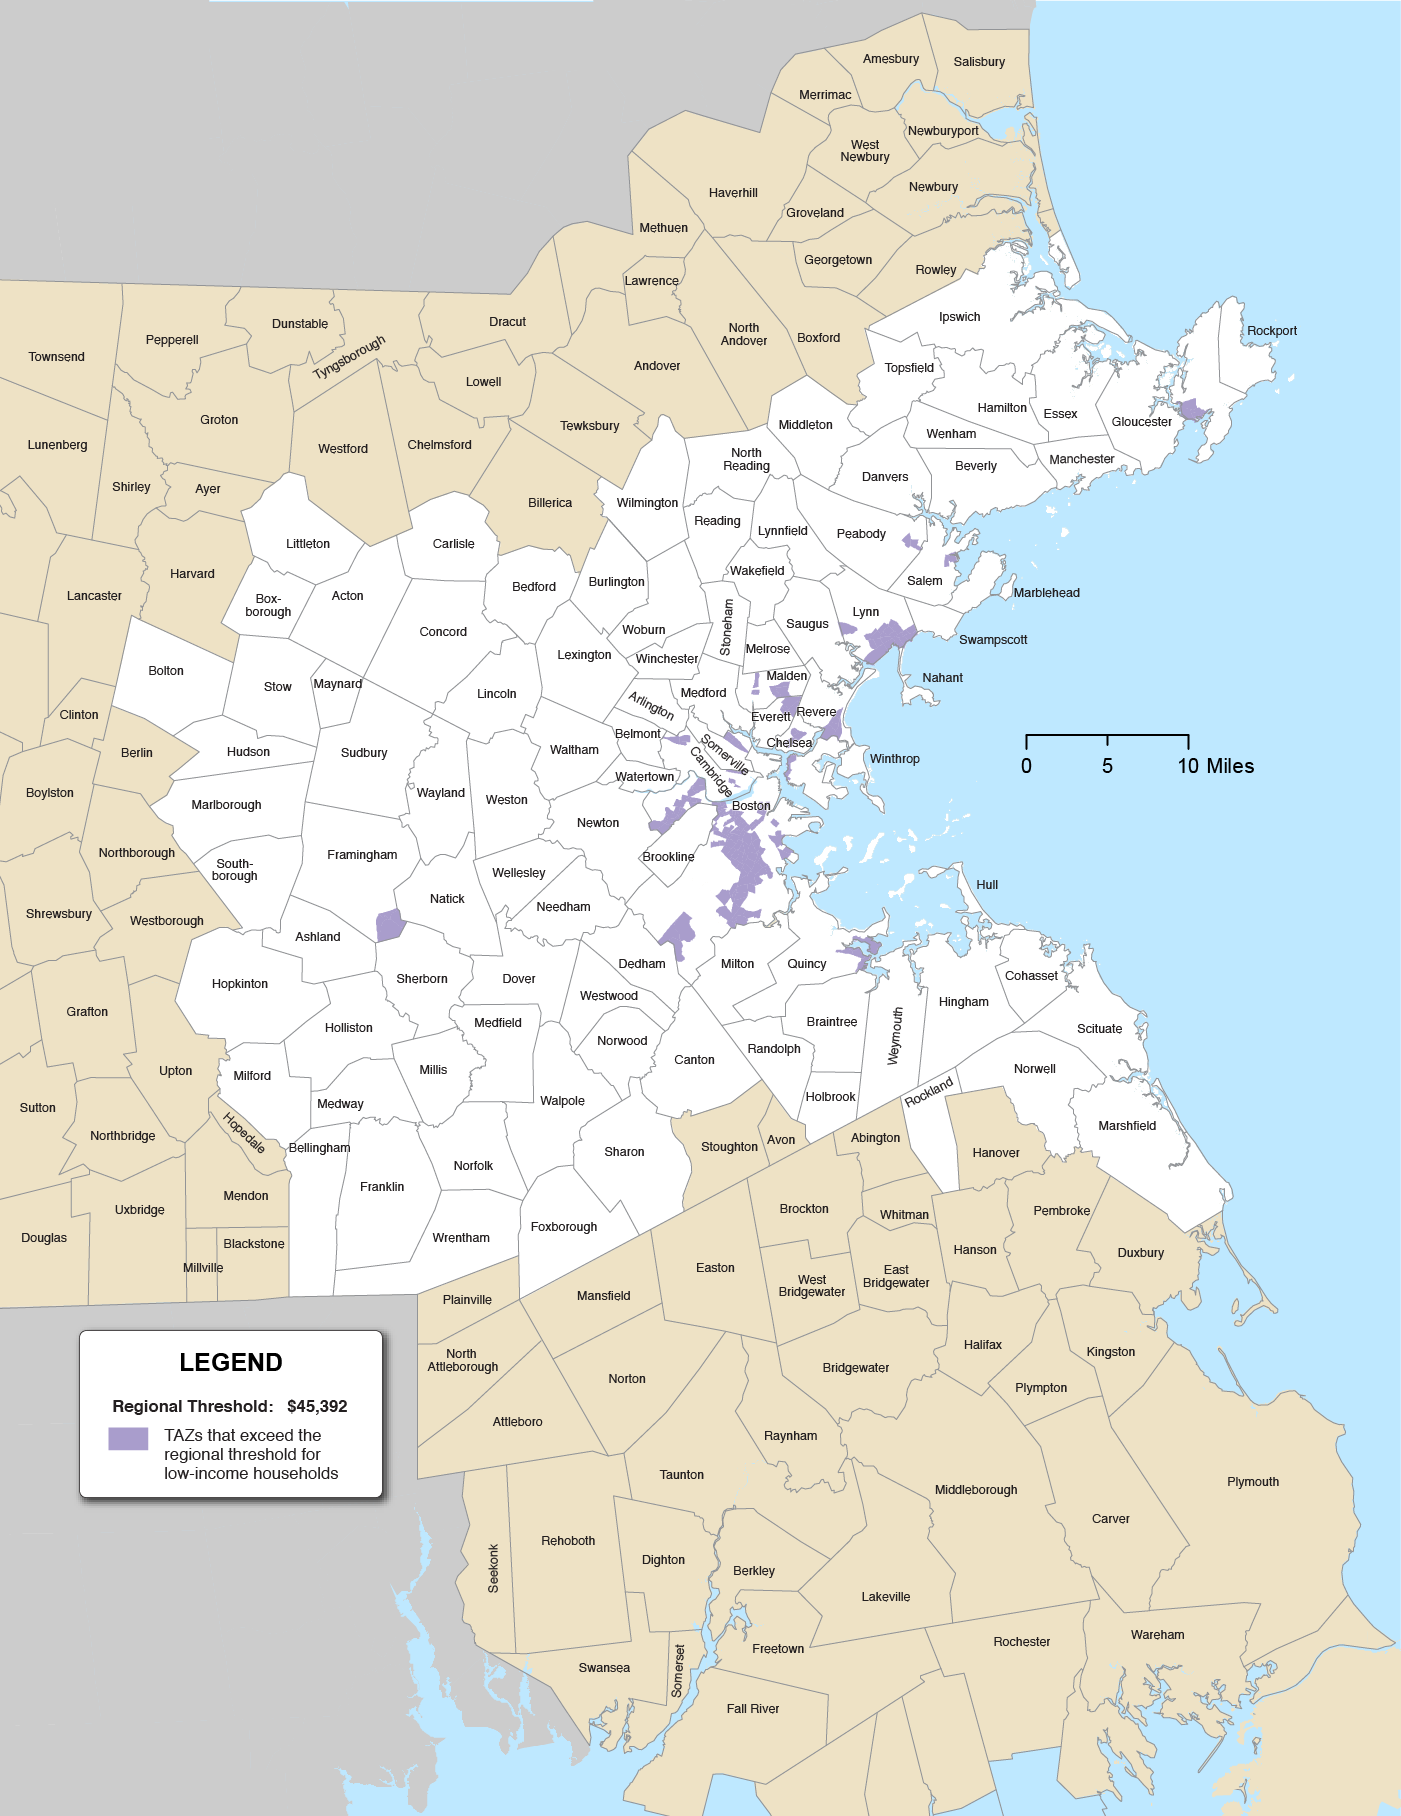 Figure 8-2 is a map of the Boston Region municipalities and the TAZs that exceed the regional threshold for the low-income households highlighted in purple. The Regional Threshold is $45,392.